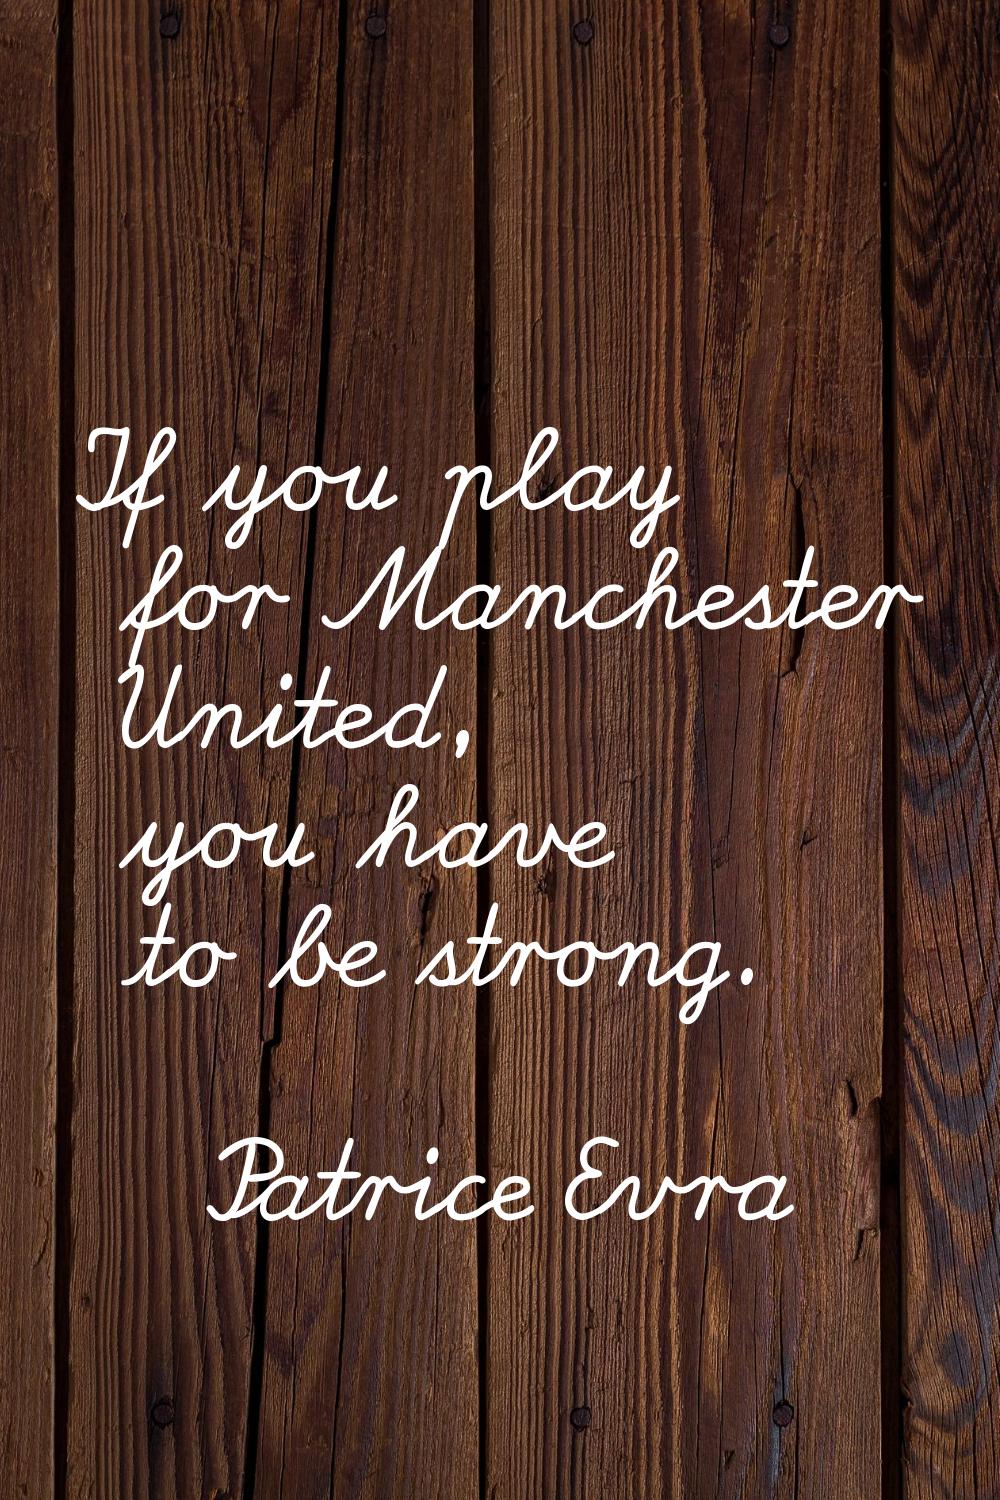 If you play for Manchester United, you have to be strong.